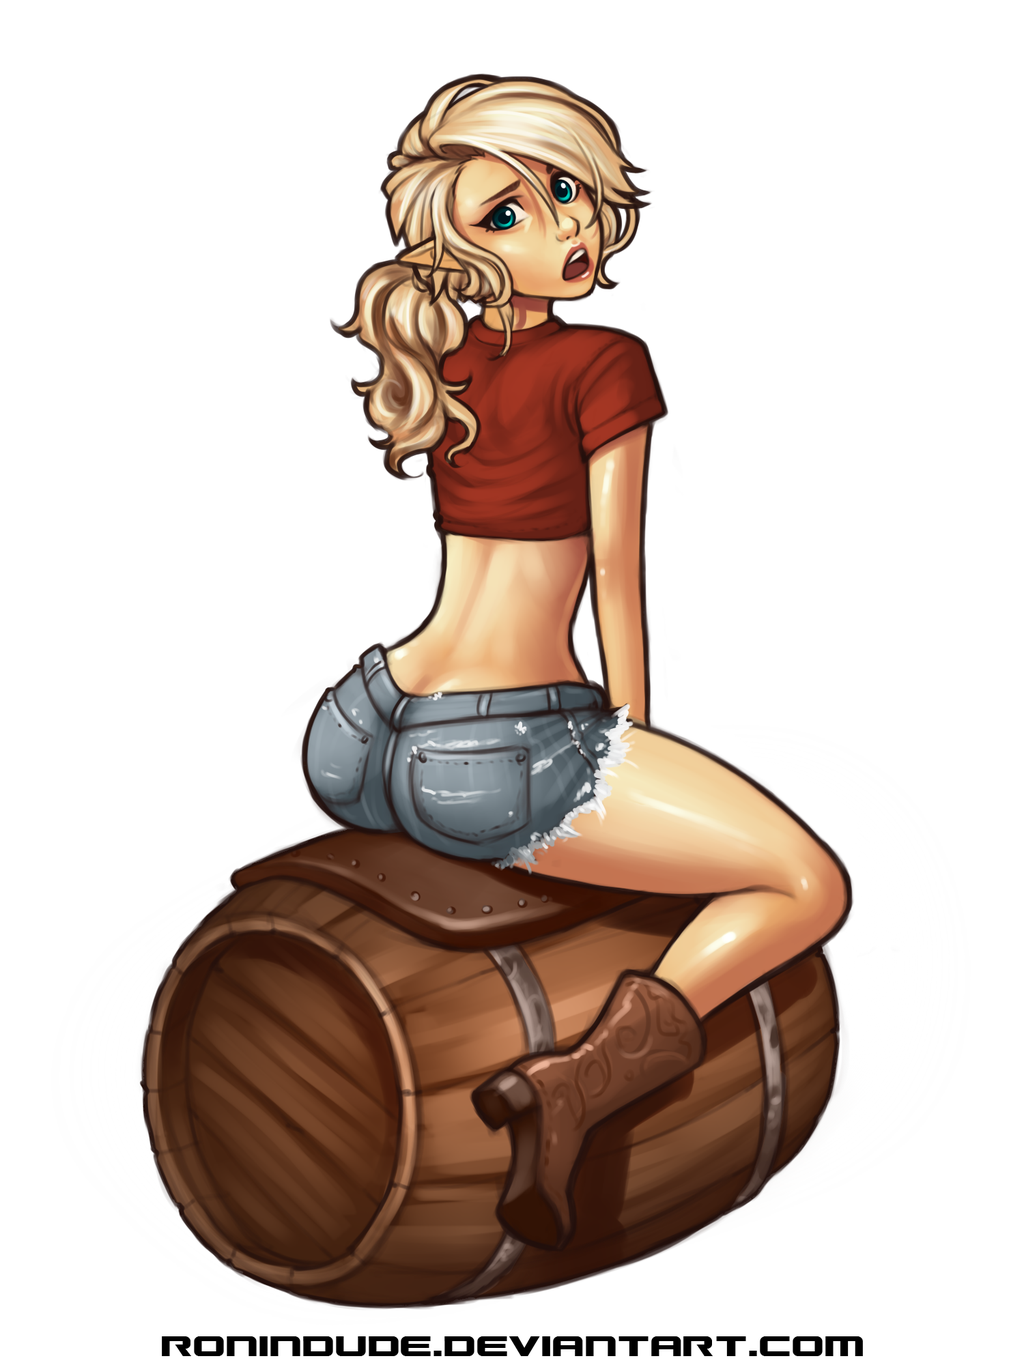 1girl bangs barrel blonde_hair blue_eyes boots commentary cowboy_boots crop_top cutoffs denim denim_shorts elf full_body highres lips looking_at_viewer looking_back midriff open_mouth original pointy_ears ponytail ronindude sassy_(ronindude) shorts solo straddling swept_bangs watermark web_address